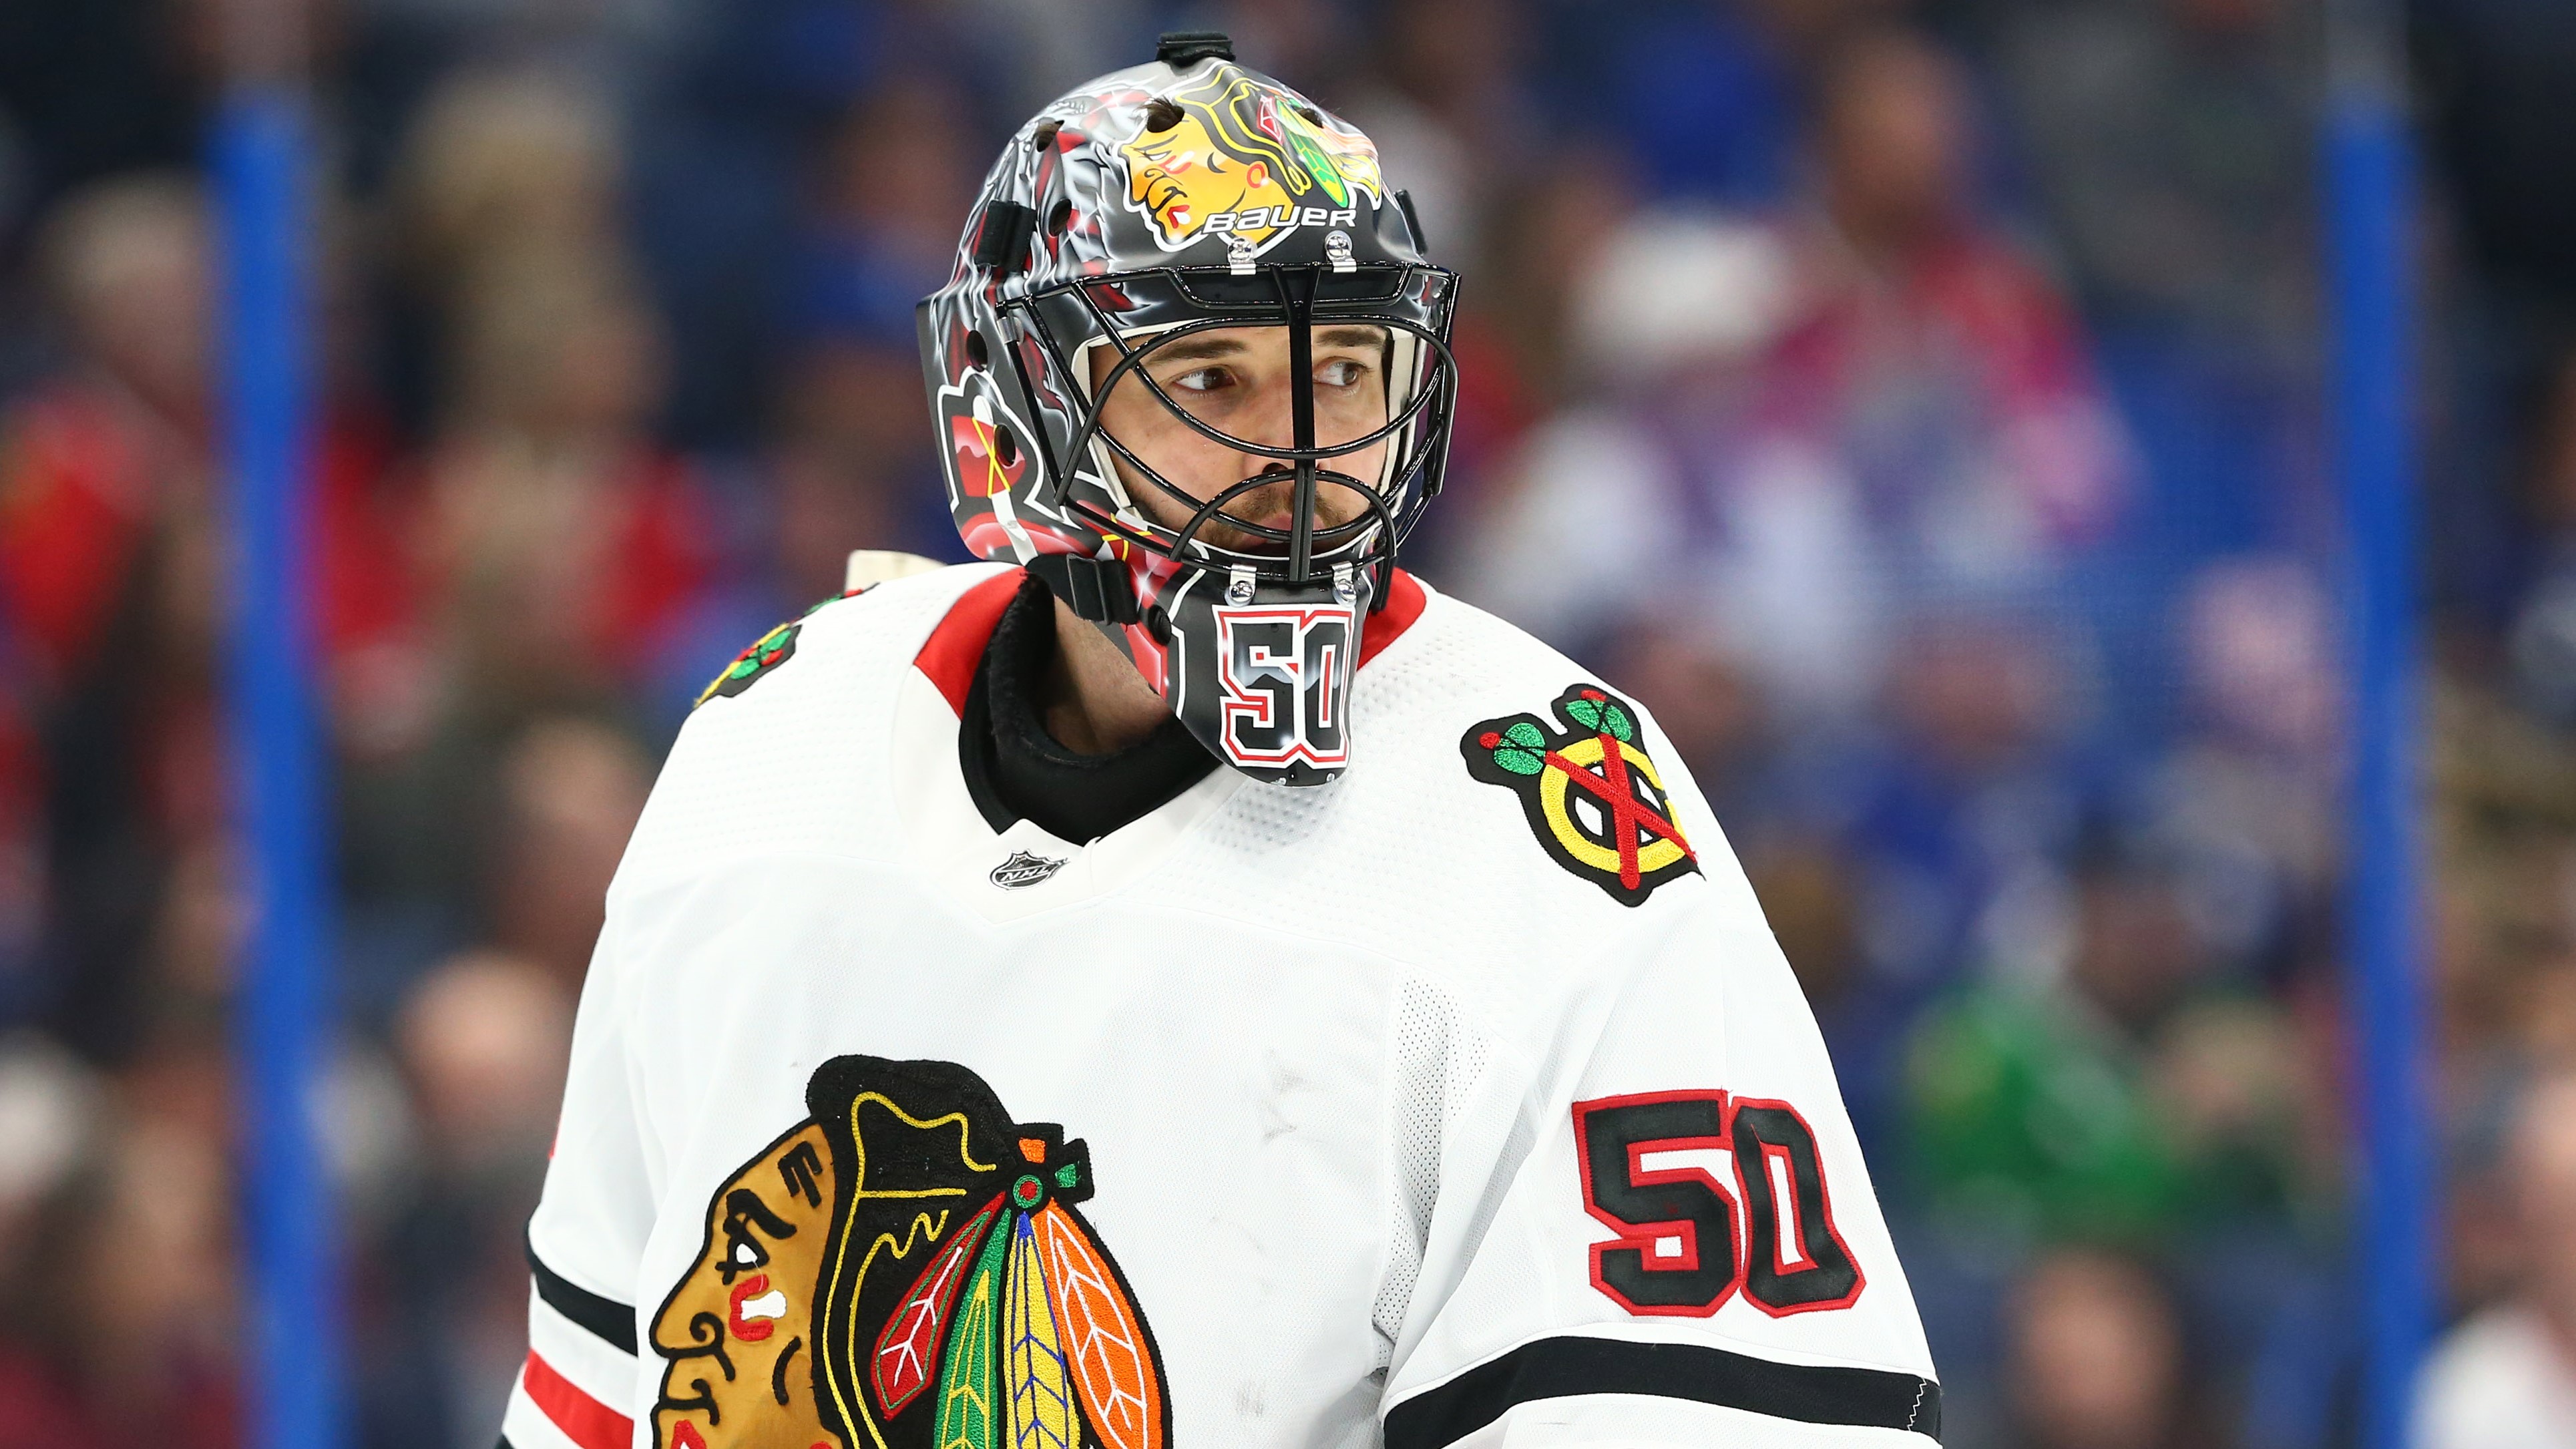 NHL rumors: Devils sign Corey Crawford to share goalie duties with